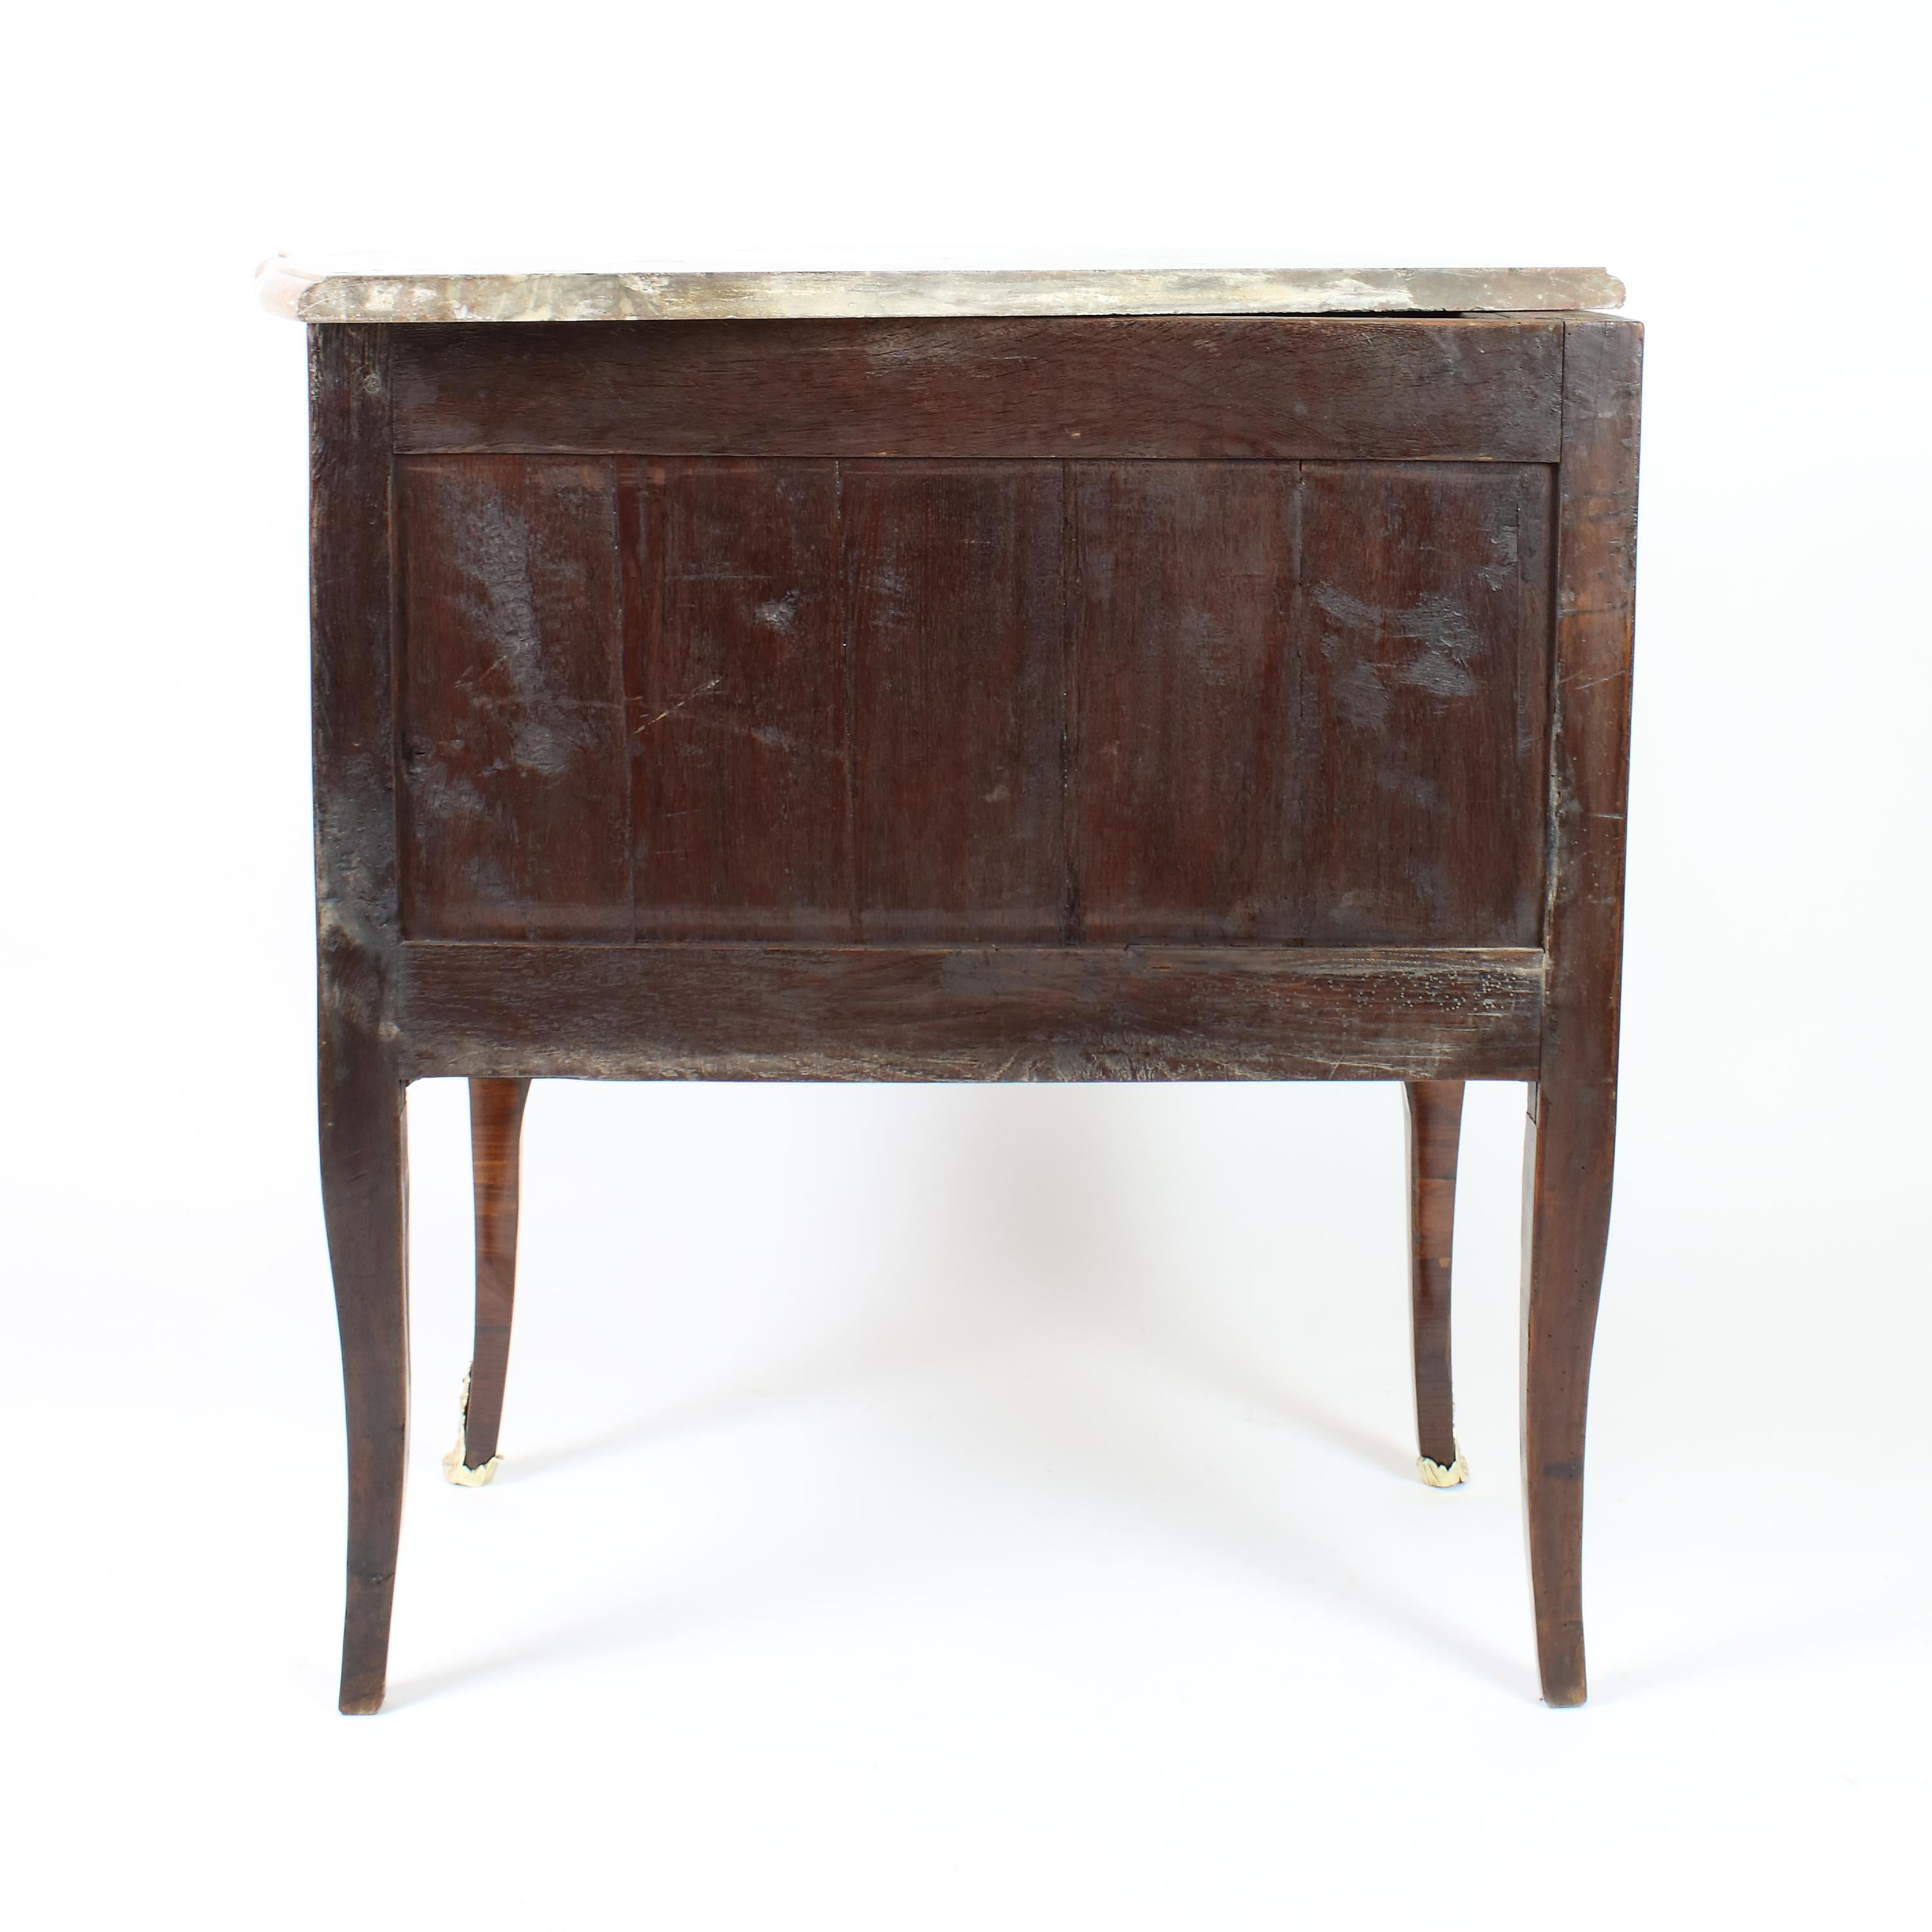 18th century Louis XV small Marquetry bombé shaped commode or sauteuse in the manner of Pierre Roussel (1723-1782):

A Louis XV gilt bronze mounted marquetry commode with bombé front and sides and shaped apron standing on four cabriole legs,